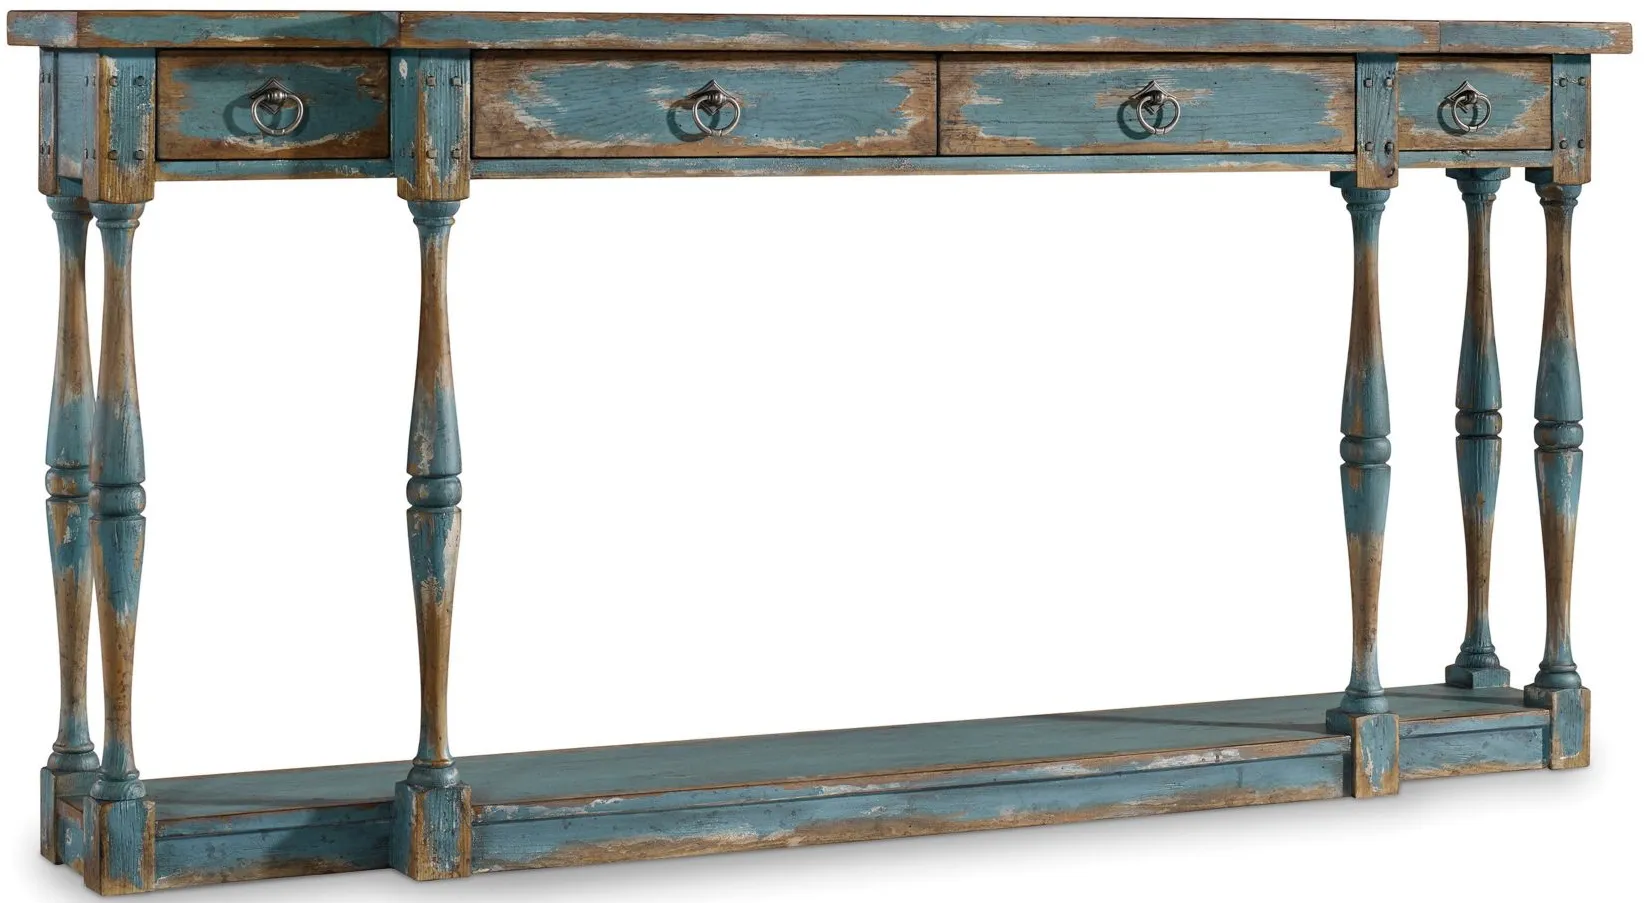 Sanctuary Four-Drawer Console Table in Sky Blue by Hooker Furniture